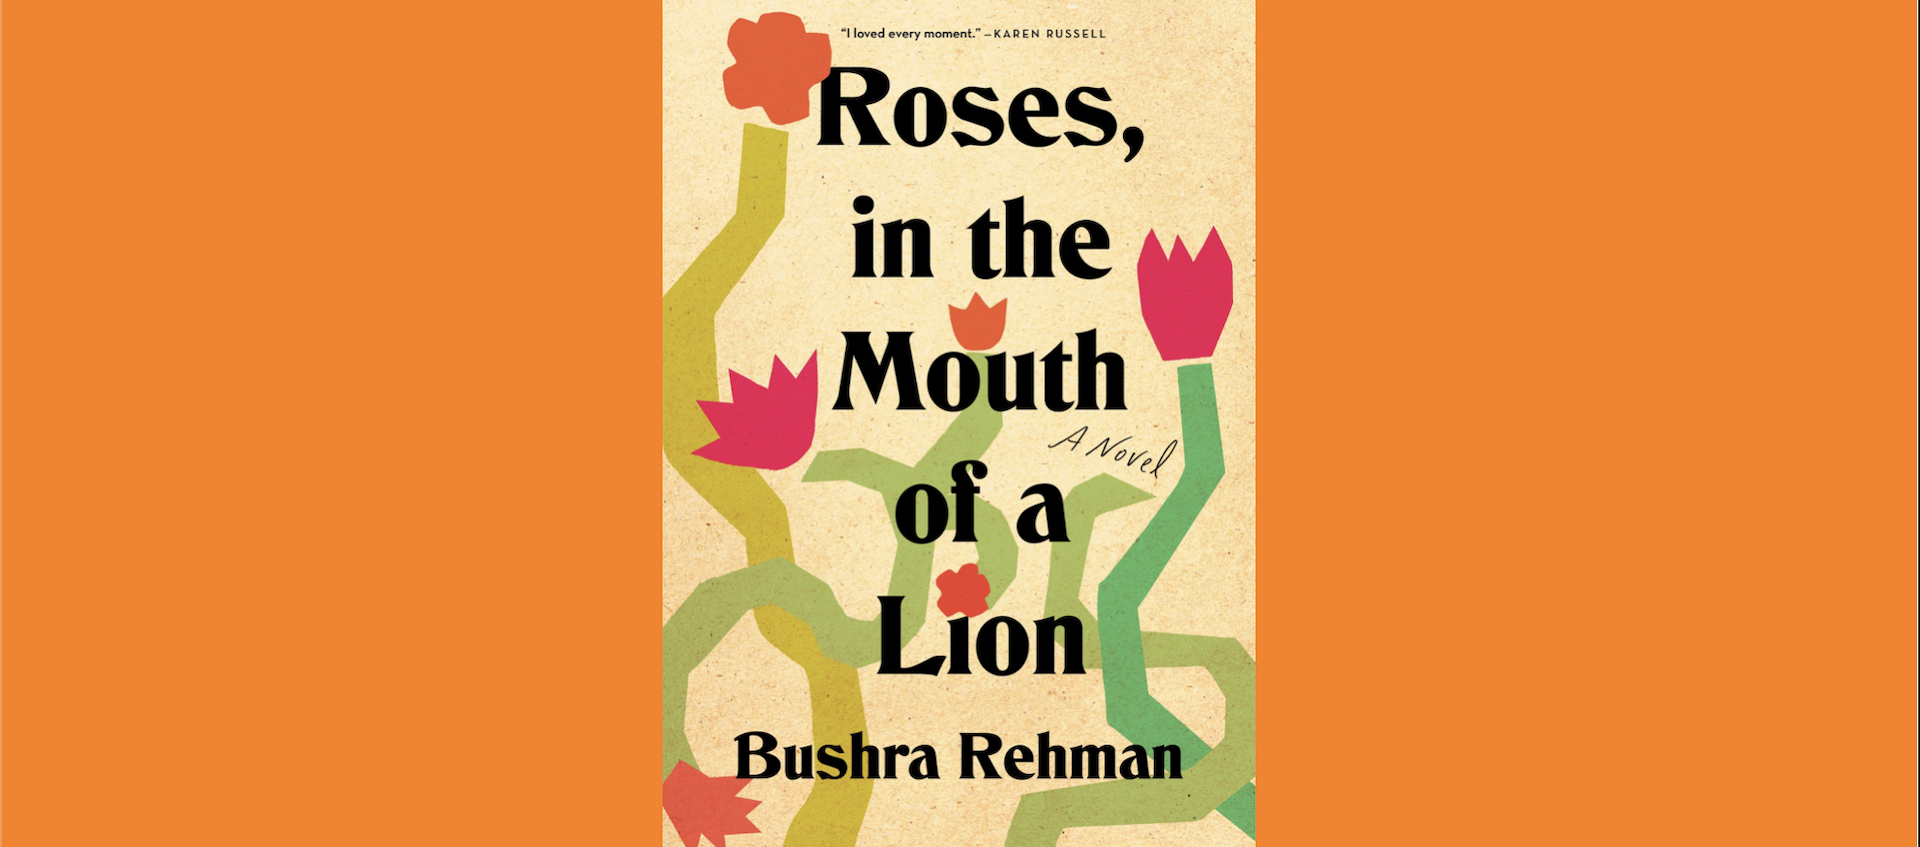 The cover for Bushra Rehman's book "Roses, In the Mouth of a Lion." The title fills the center of the cream-colored cover in a black, chunky, serif font. Semi-abstract red tulips curve upward in the background.